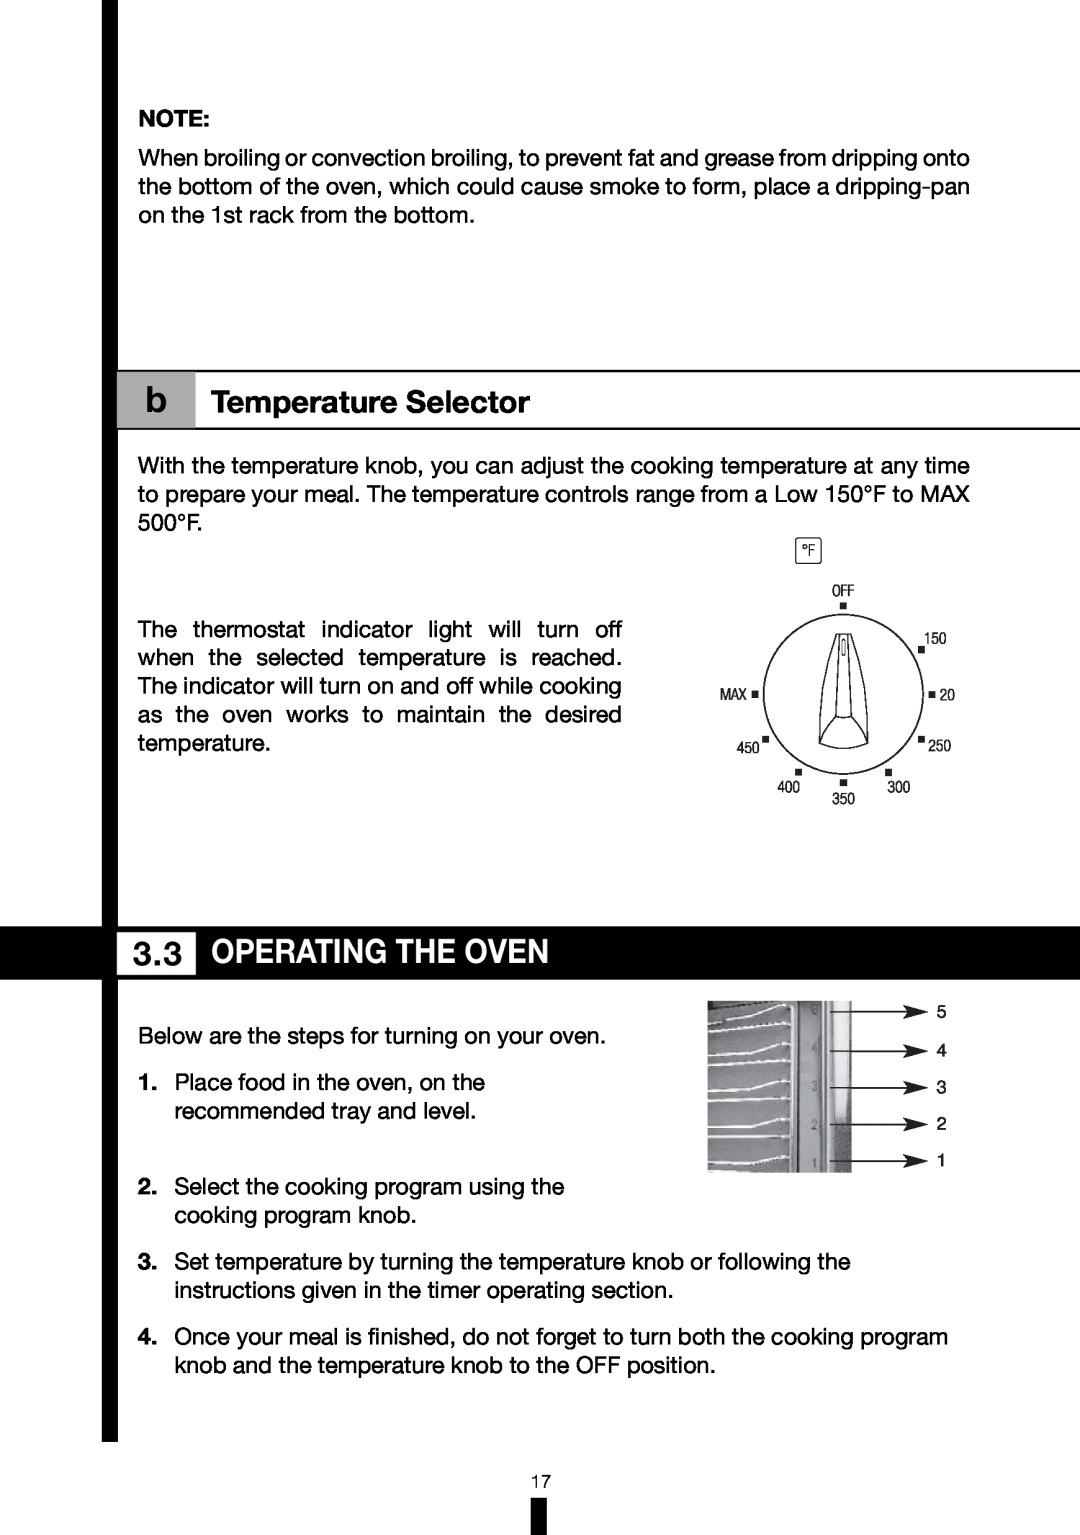 Fagor America 6HA-196BX manual Operating The Oven, b Temperature Selector, Below are the steps for turning on your oven 